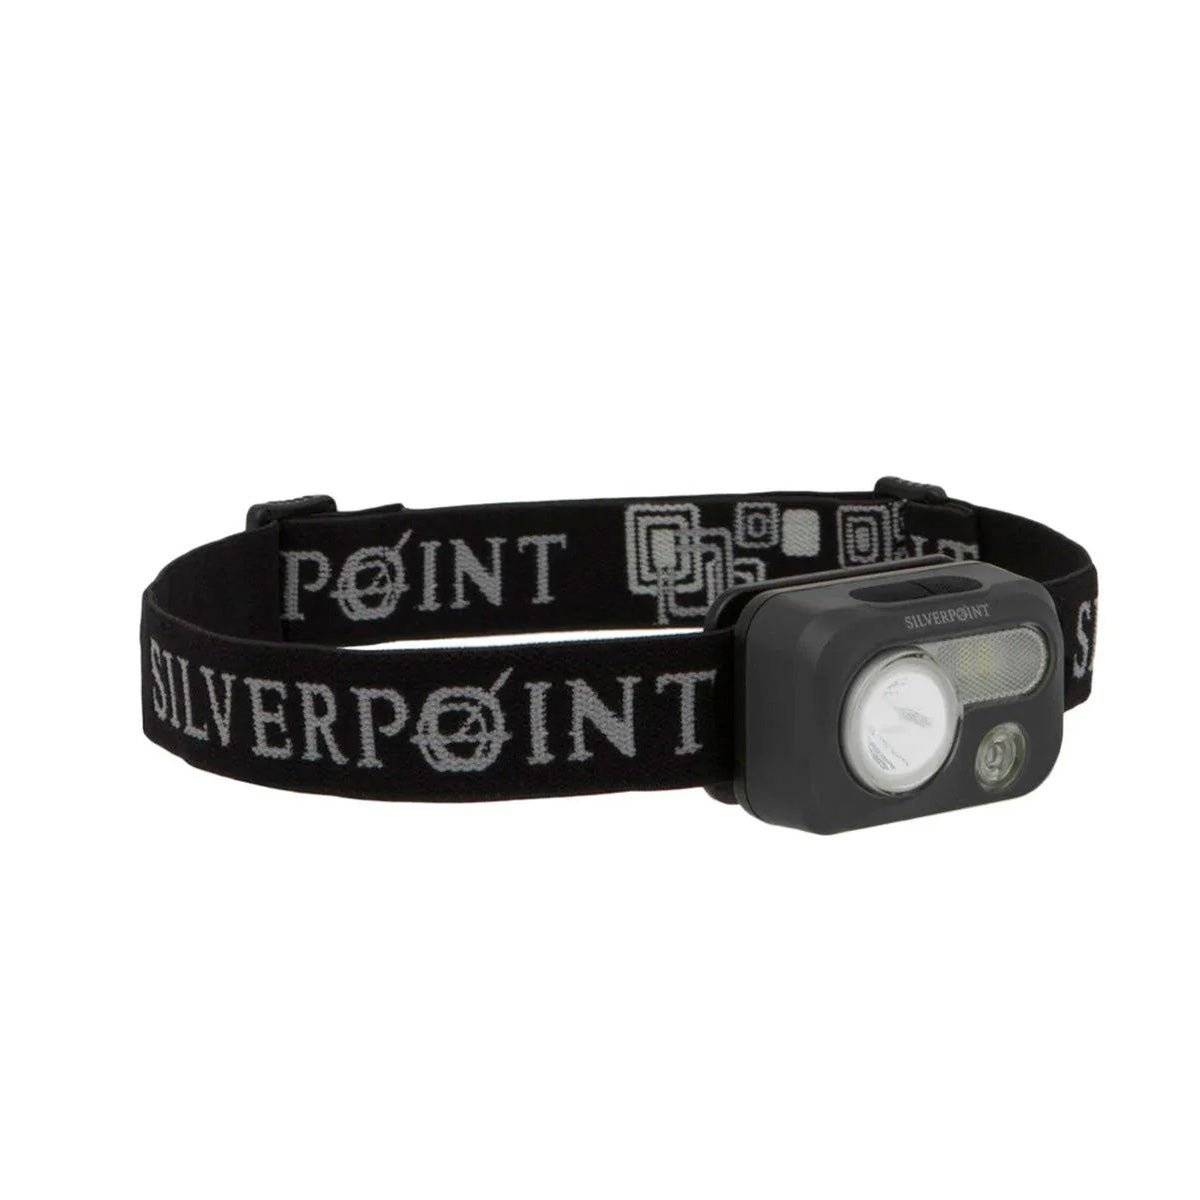 Silverpoint Scout XL220R Rechargeable Head Torch with Red Light - John Bull Clothing